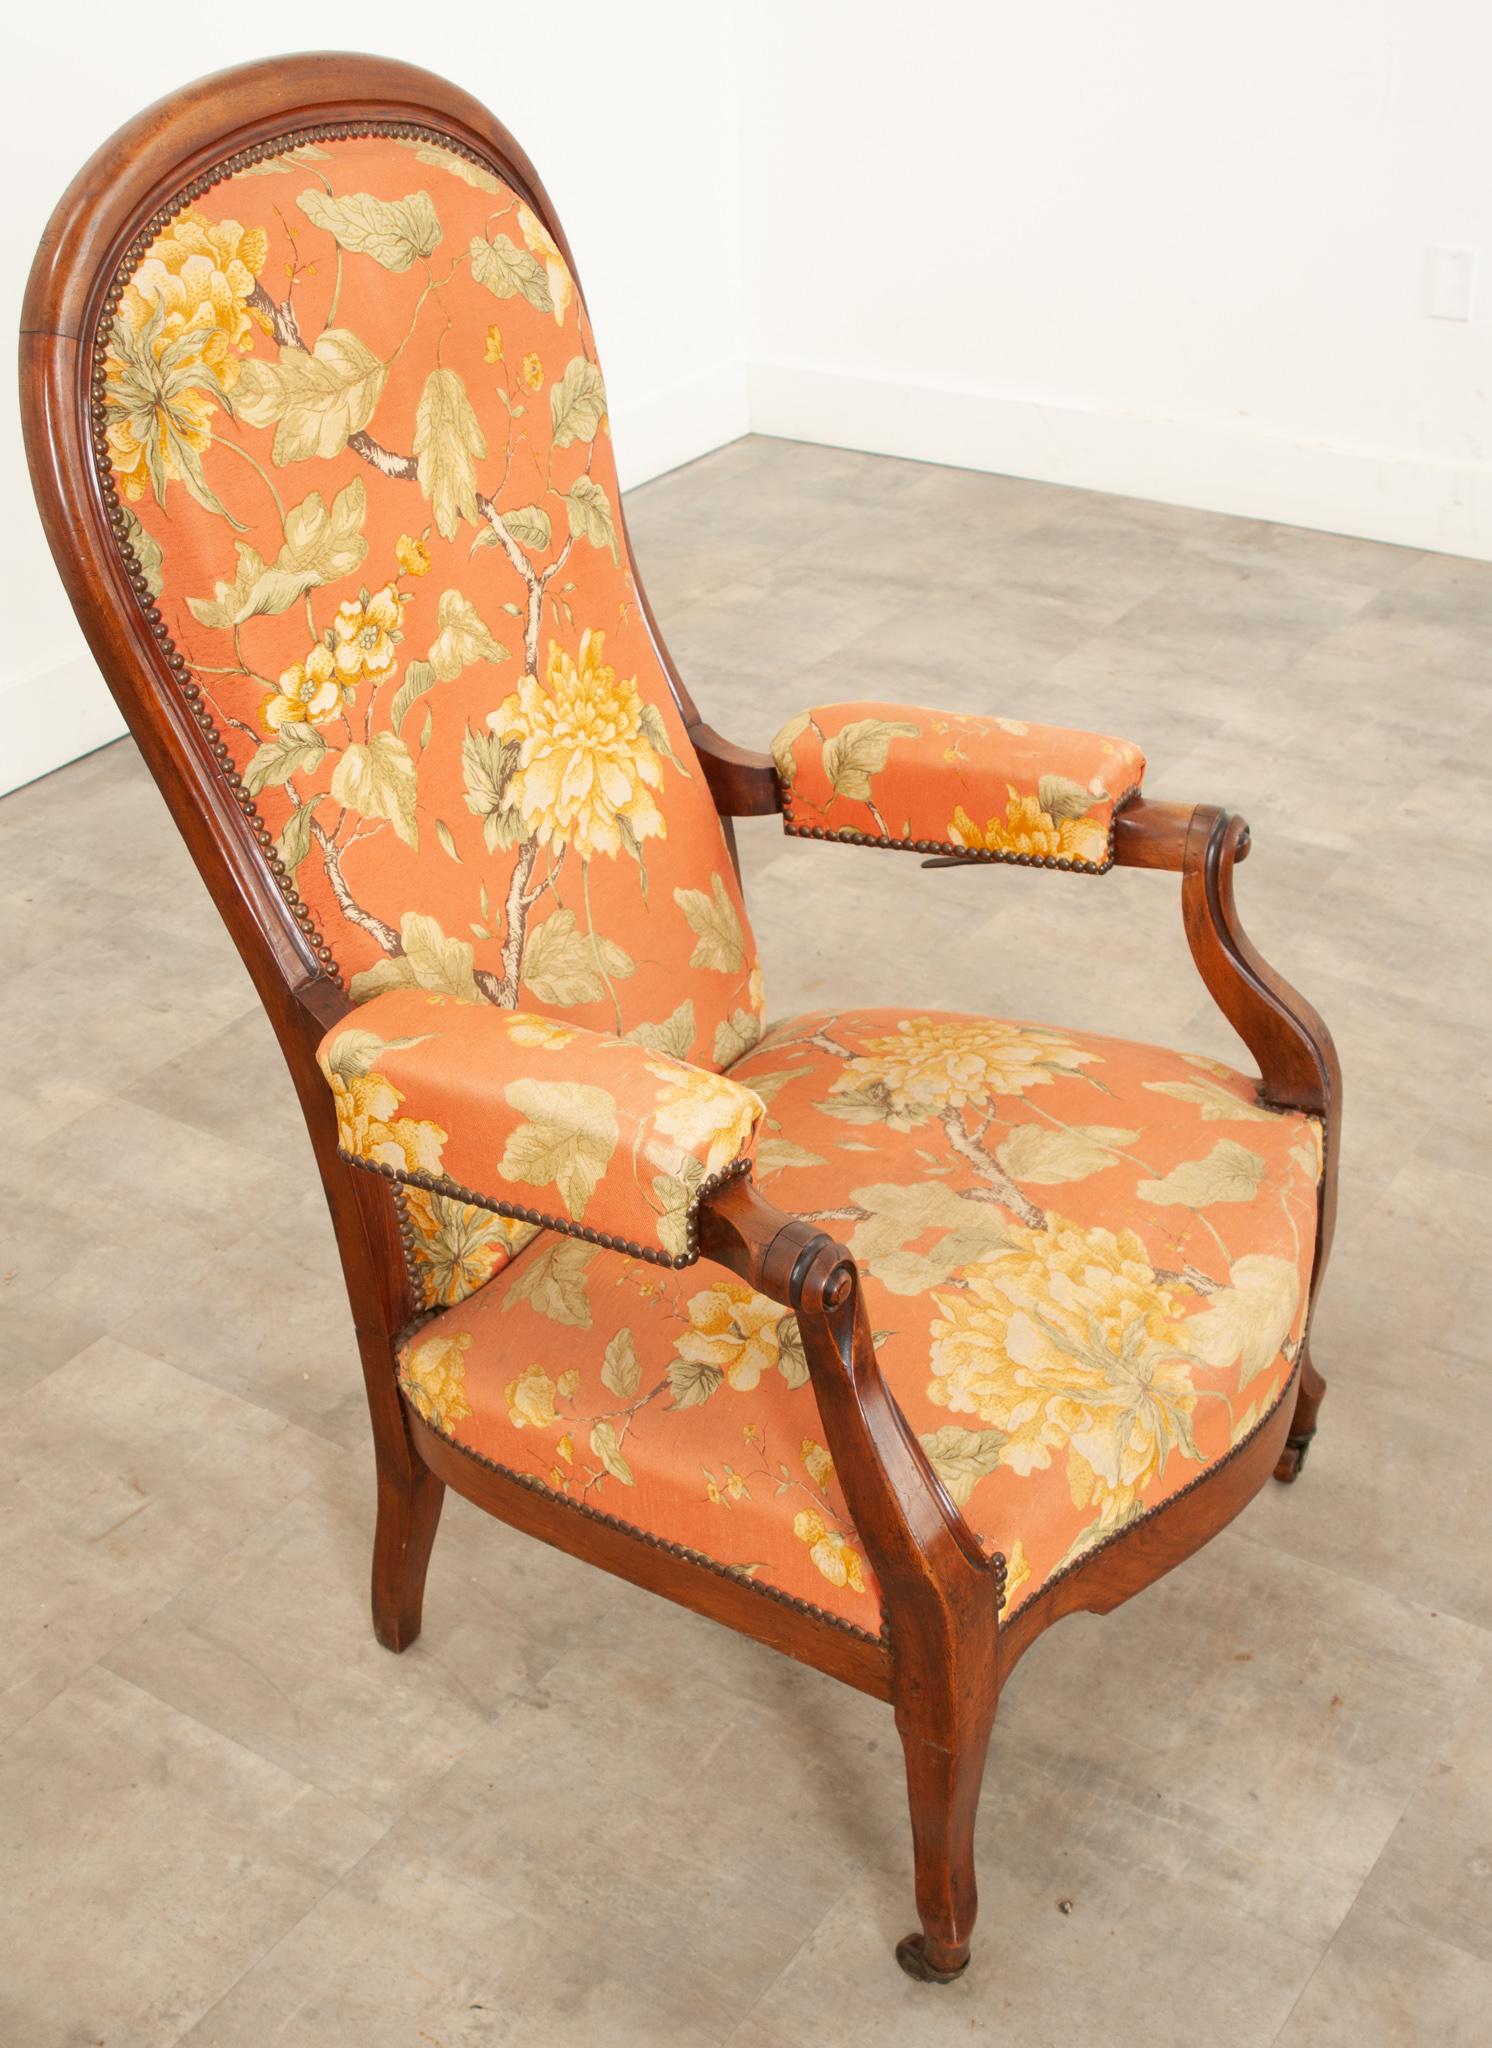 Upholstery English 19th Century Upholstered Mahogany Recliner For Sale